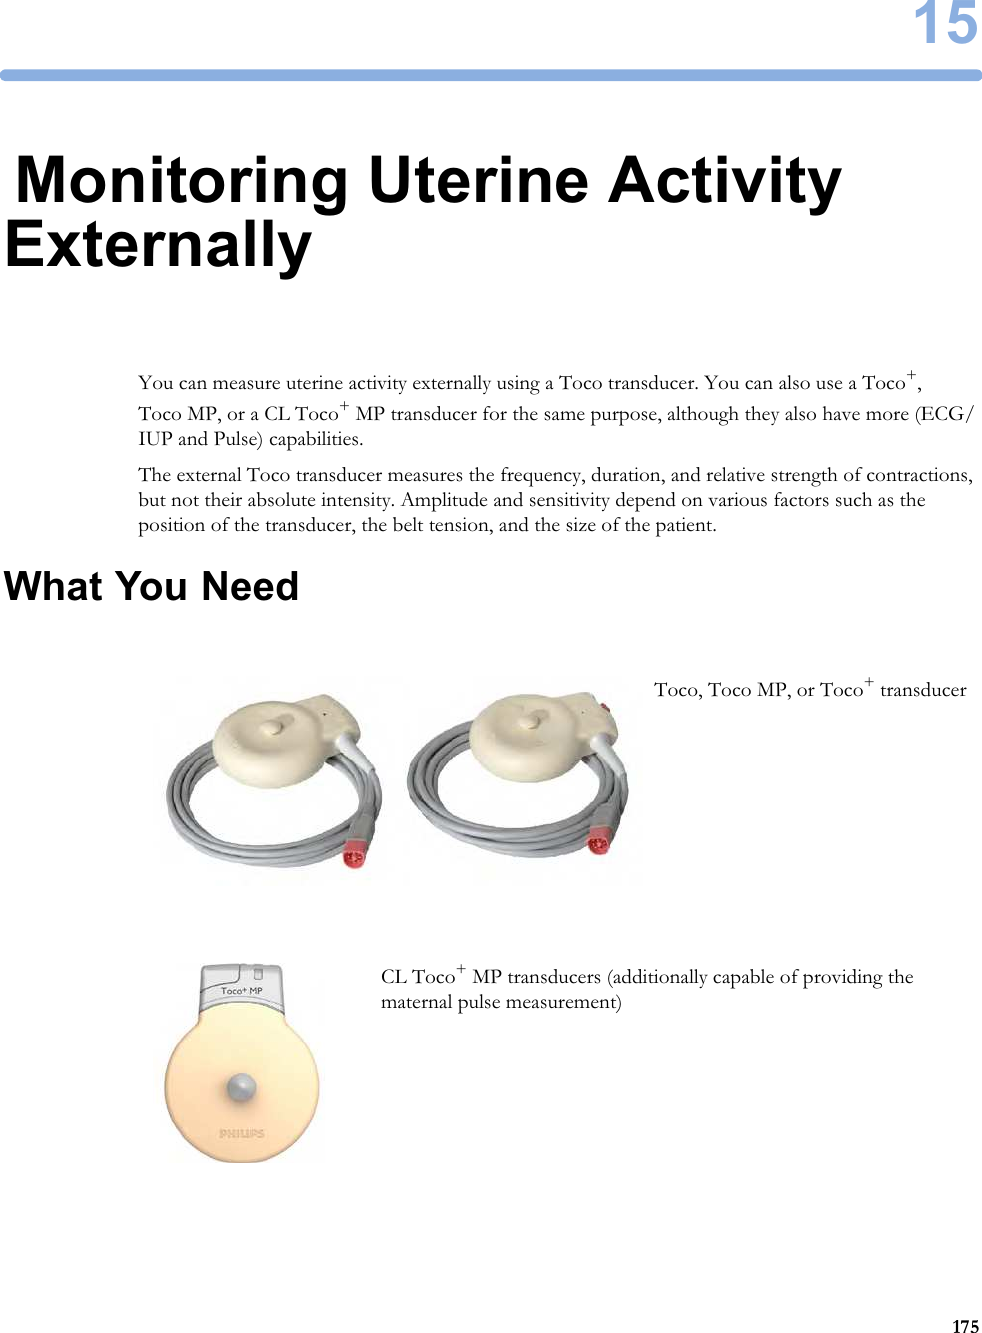 1517515Monitoring Uterine Activity ExternallyYou can measure uterine activity externally using a Toco transducer. You can also use a Toco+, Toco MP, or a CL Toco+ MP transducer for the same purpose, although they also have more (ECG/IUP and Pulse) capabilities.The external Toco transducer measures the frequency, duration, and relative strength of contractions, but not their absolute intensity. Amplitude and sensitivity depend on various factors such as the position of the transducer, the belt tension, and the size of the patient.What You NeedToco, Toco MP, or Toco+ transducerCL Toco+ MP transducers (additionally capable of providing the maternal pulse measurement)